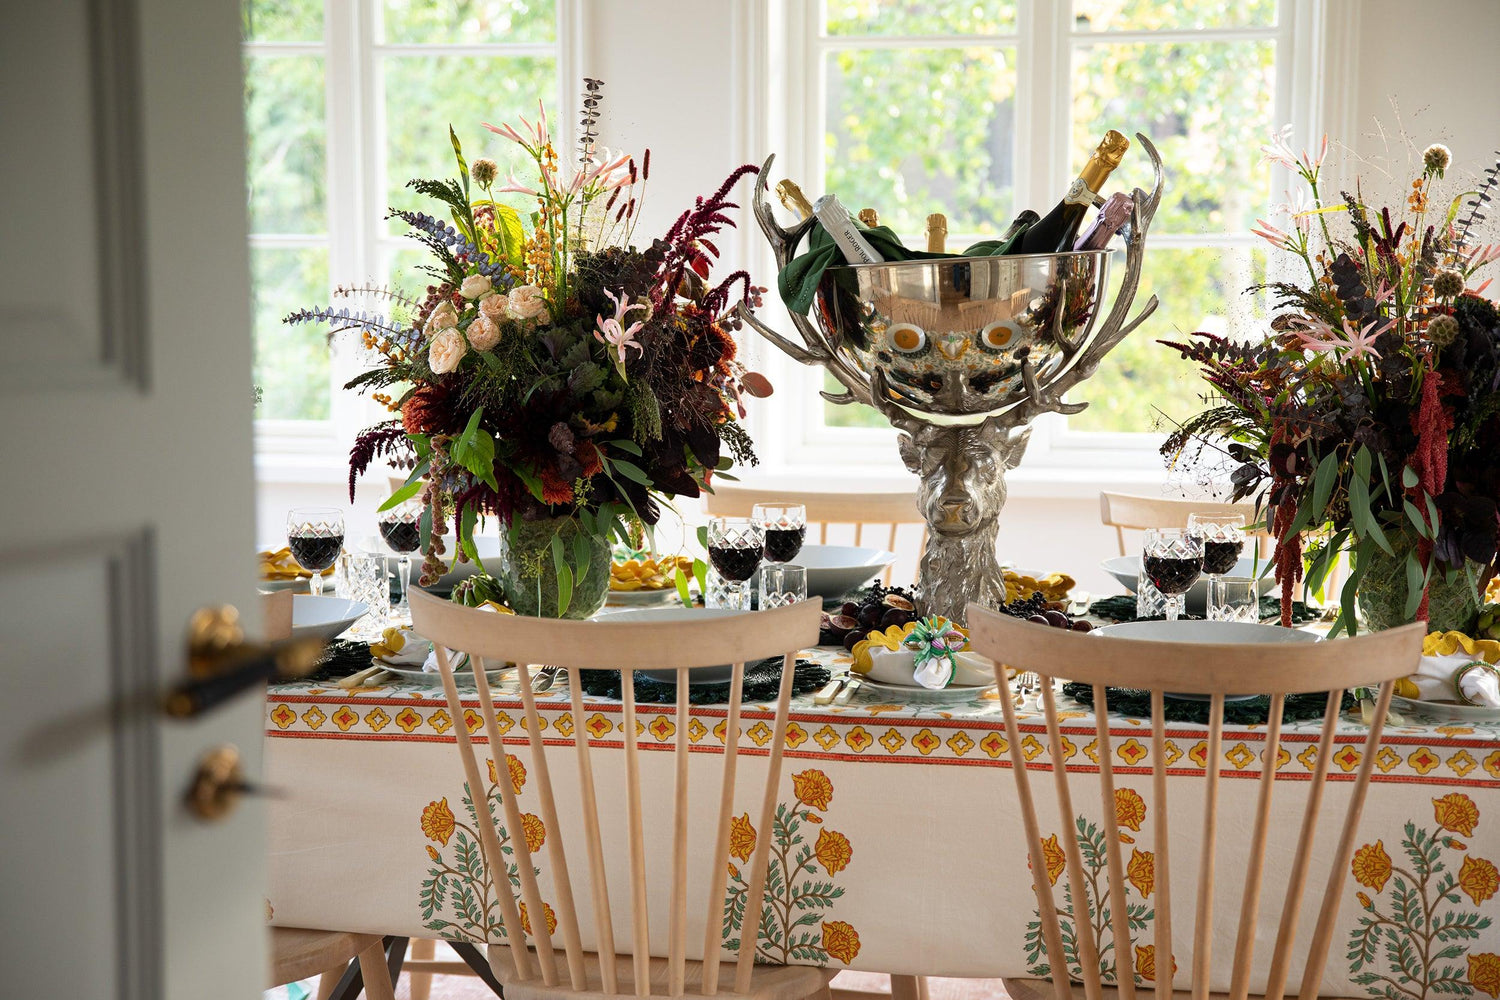 Setting the Table with Flowers - Tips for the Dinner Table! - Von Home